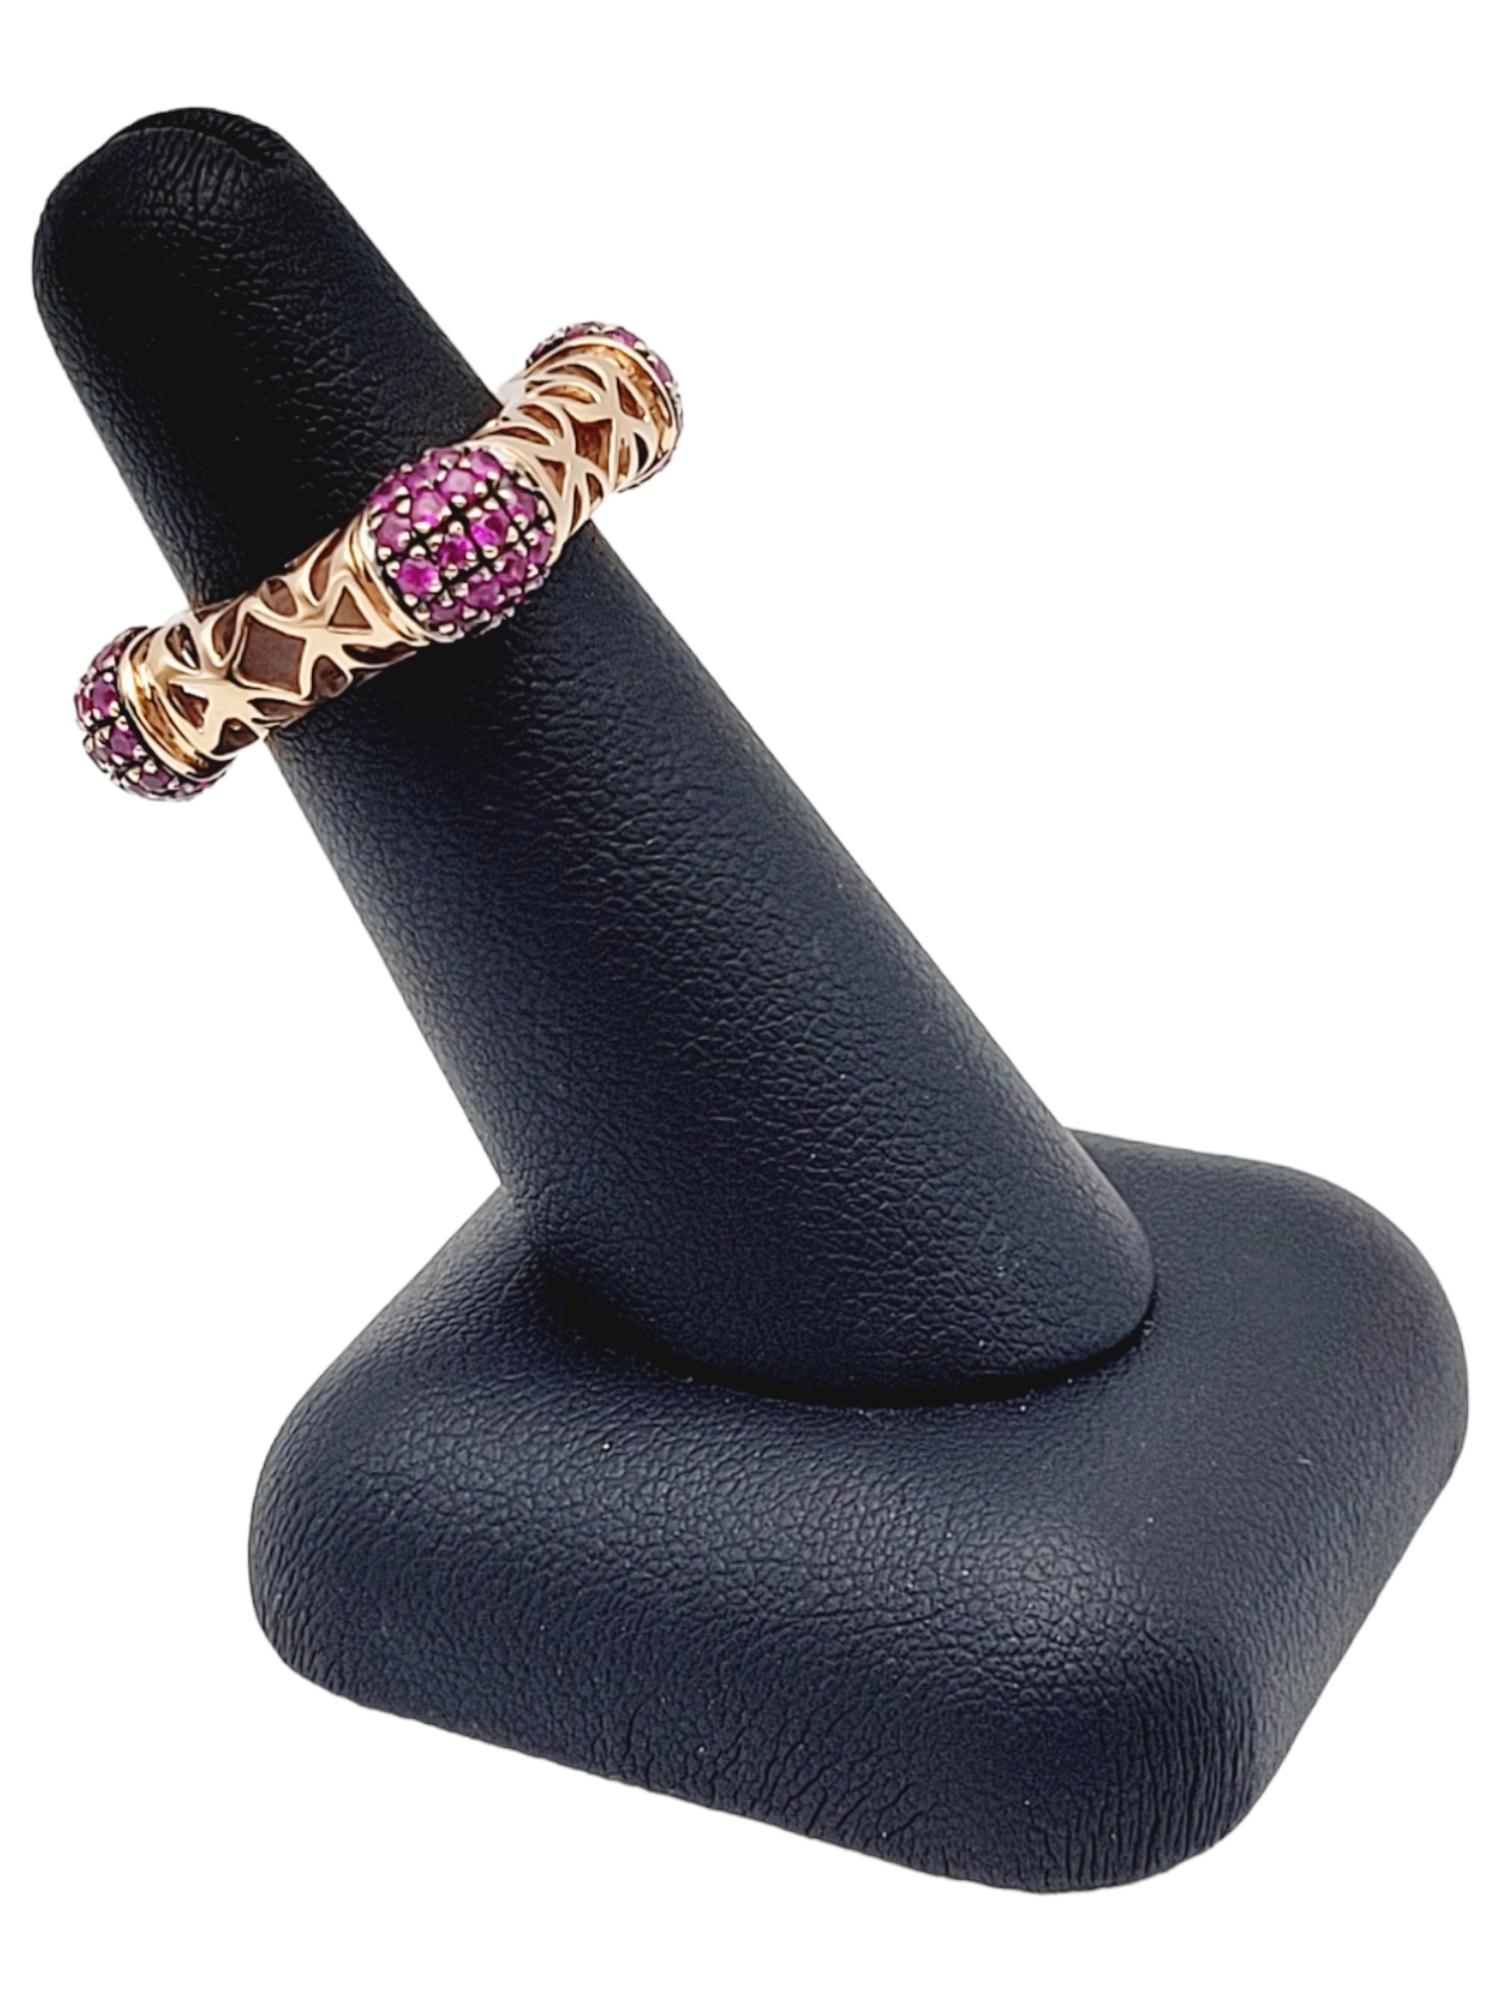 Contemporary Ruby Filigree Square Statement Band Ring in 14 Karat Rose Gold For Sale 6